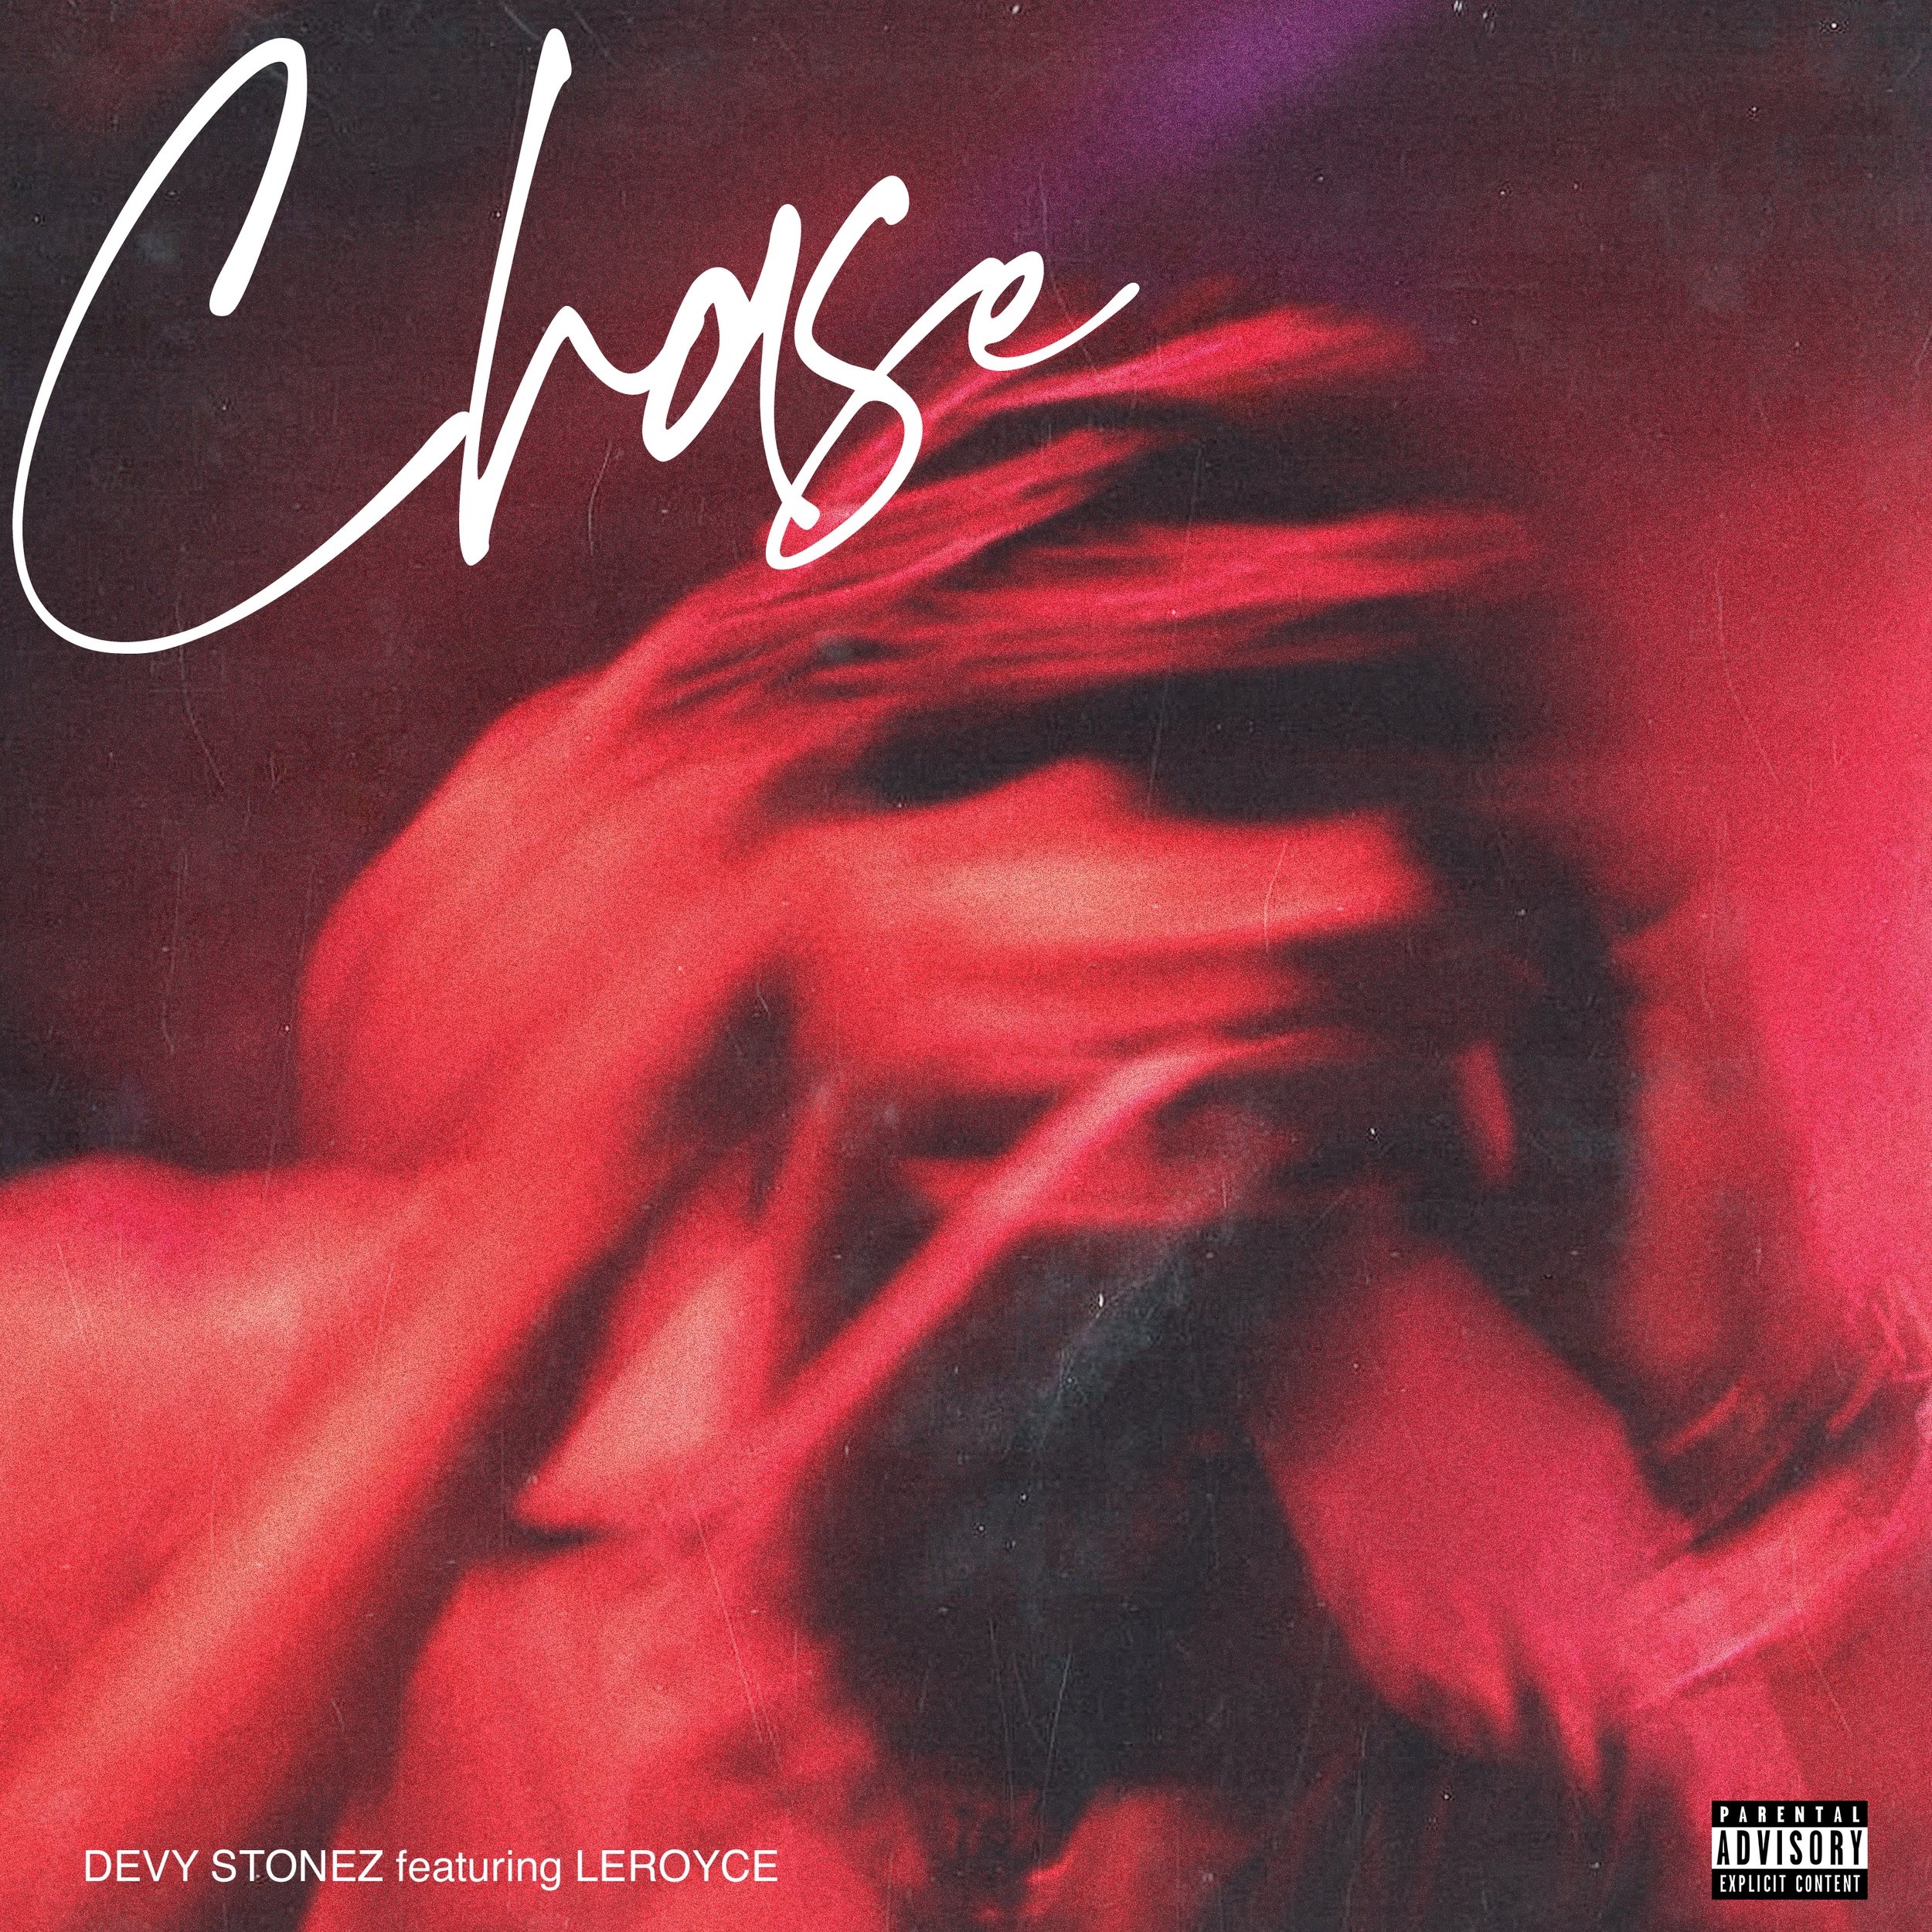 Devy Stonez - 'Chase' single cover.jpg